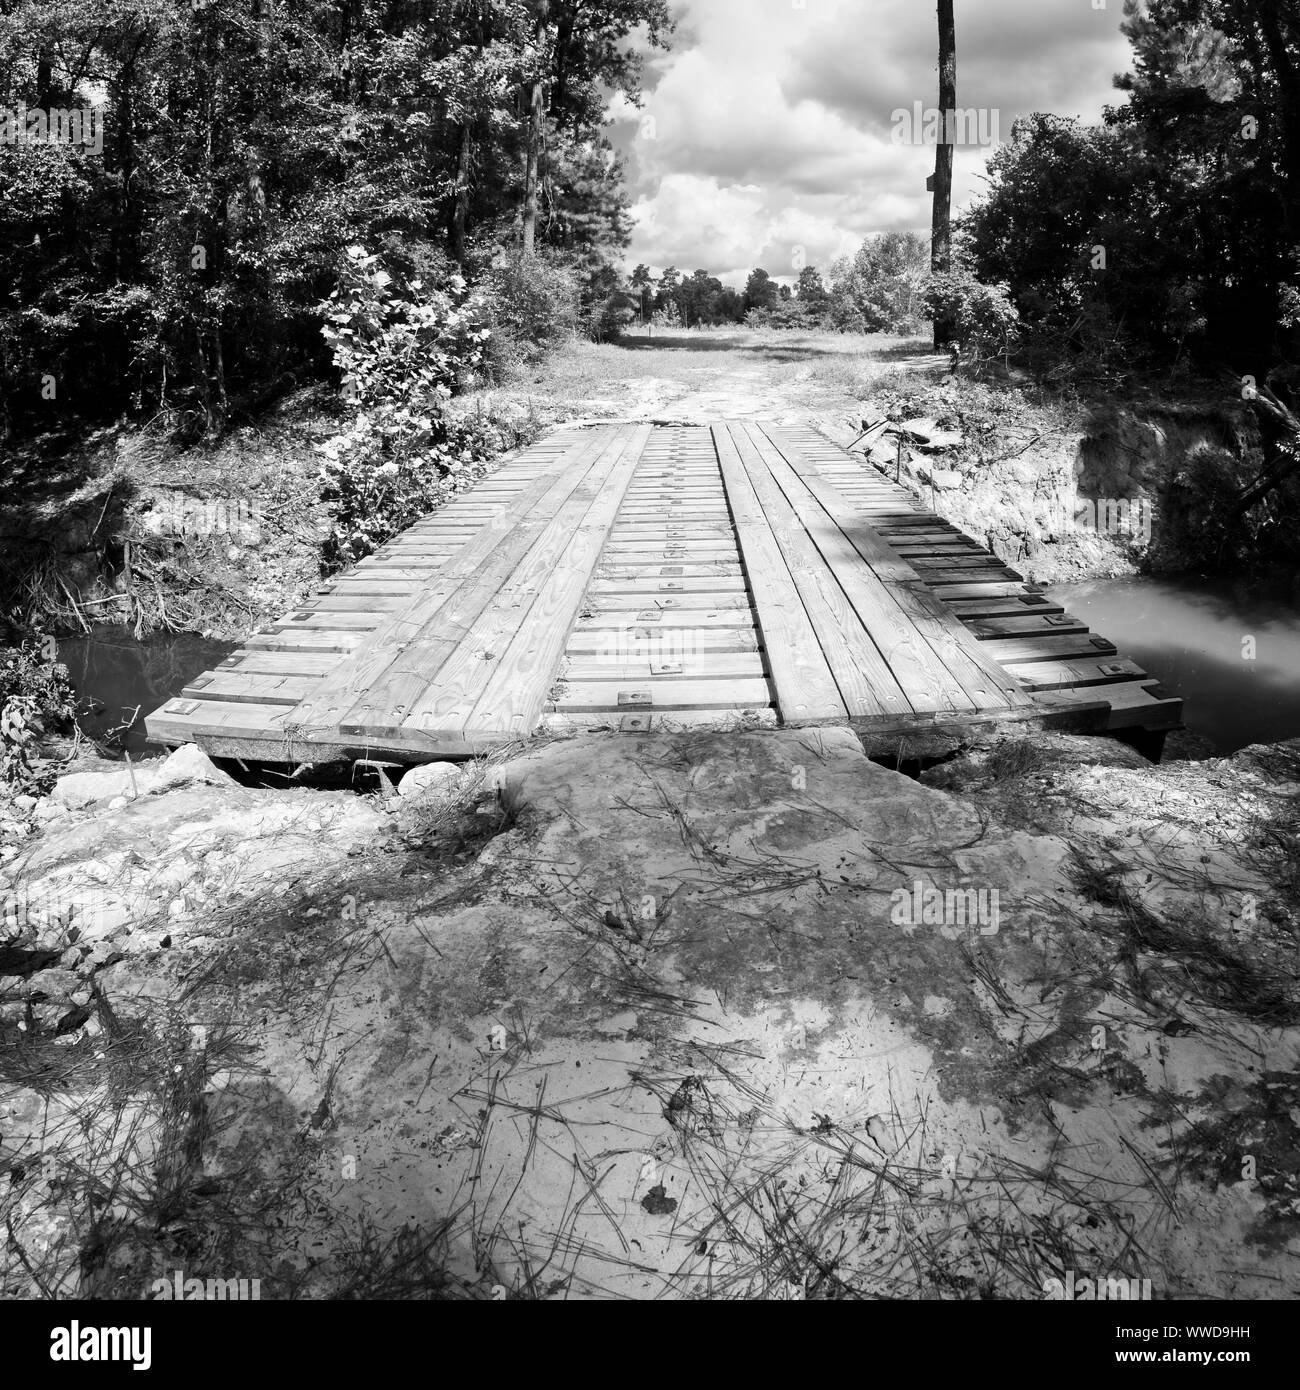 The Woodlands, TX USA - 08/23/2019  -  Wooden Bridge Over Creek in the Woods 3 in B&W Stock Photo